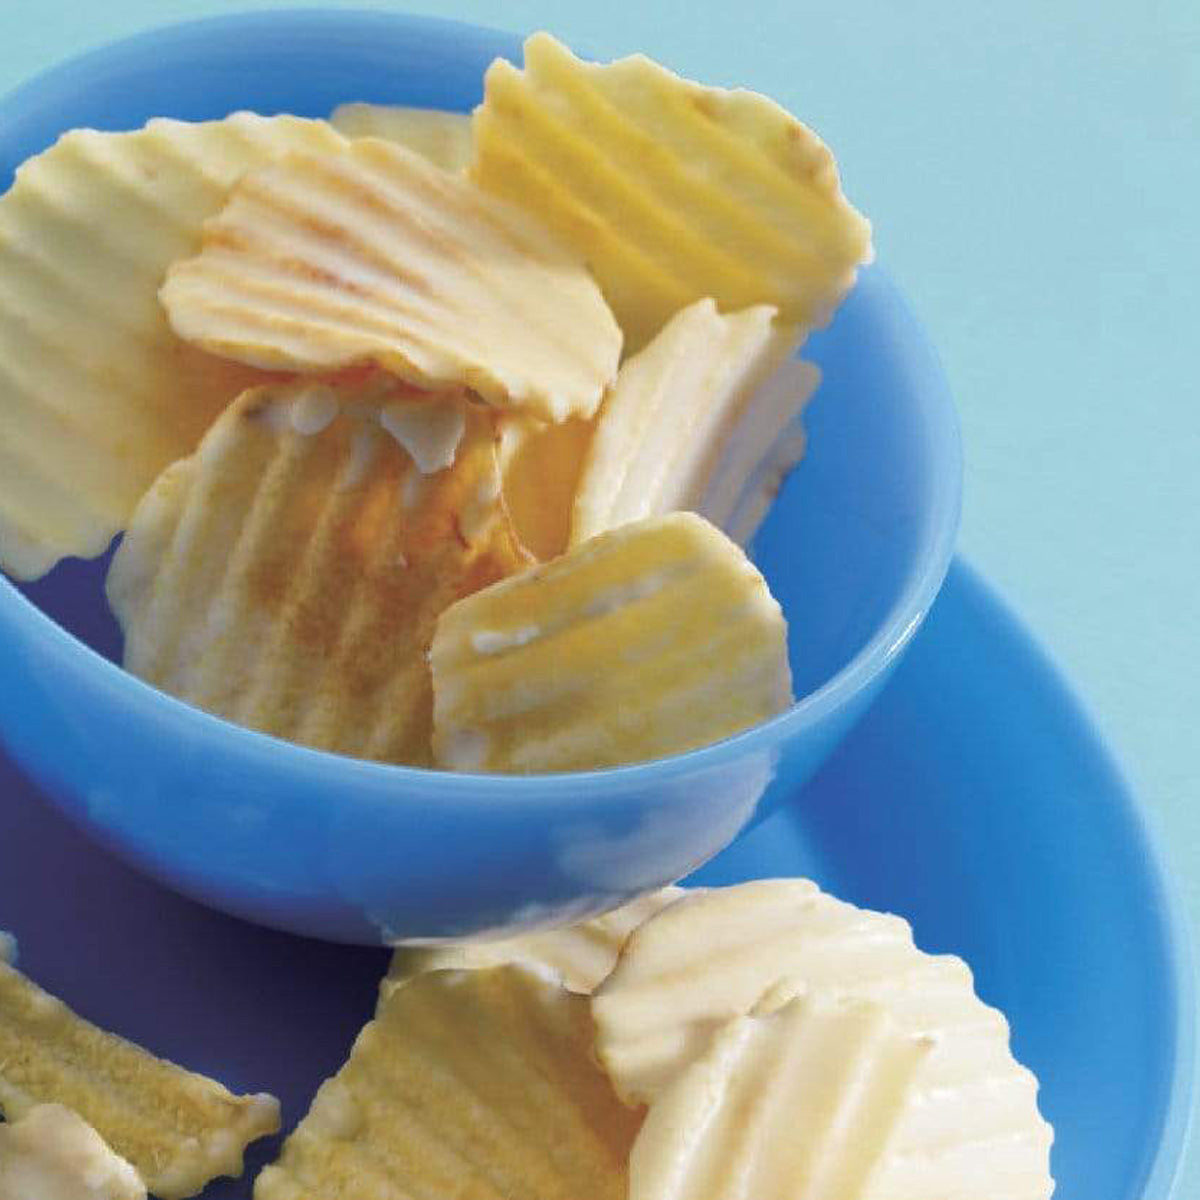 ROYCE' Chocolate - Potatochip Chocolate "Fromage Blanc" - Image shows white chocolate-coated potato chips with a ridged texture inside a blue bowl and plate under. Background is in the color blue.